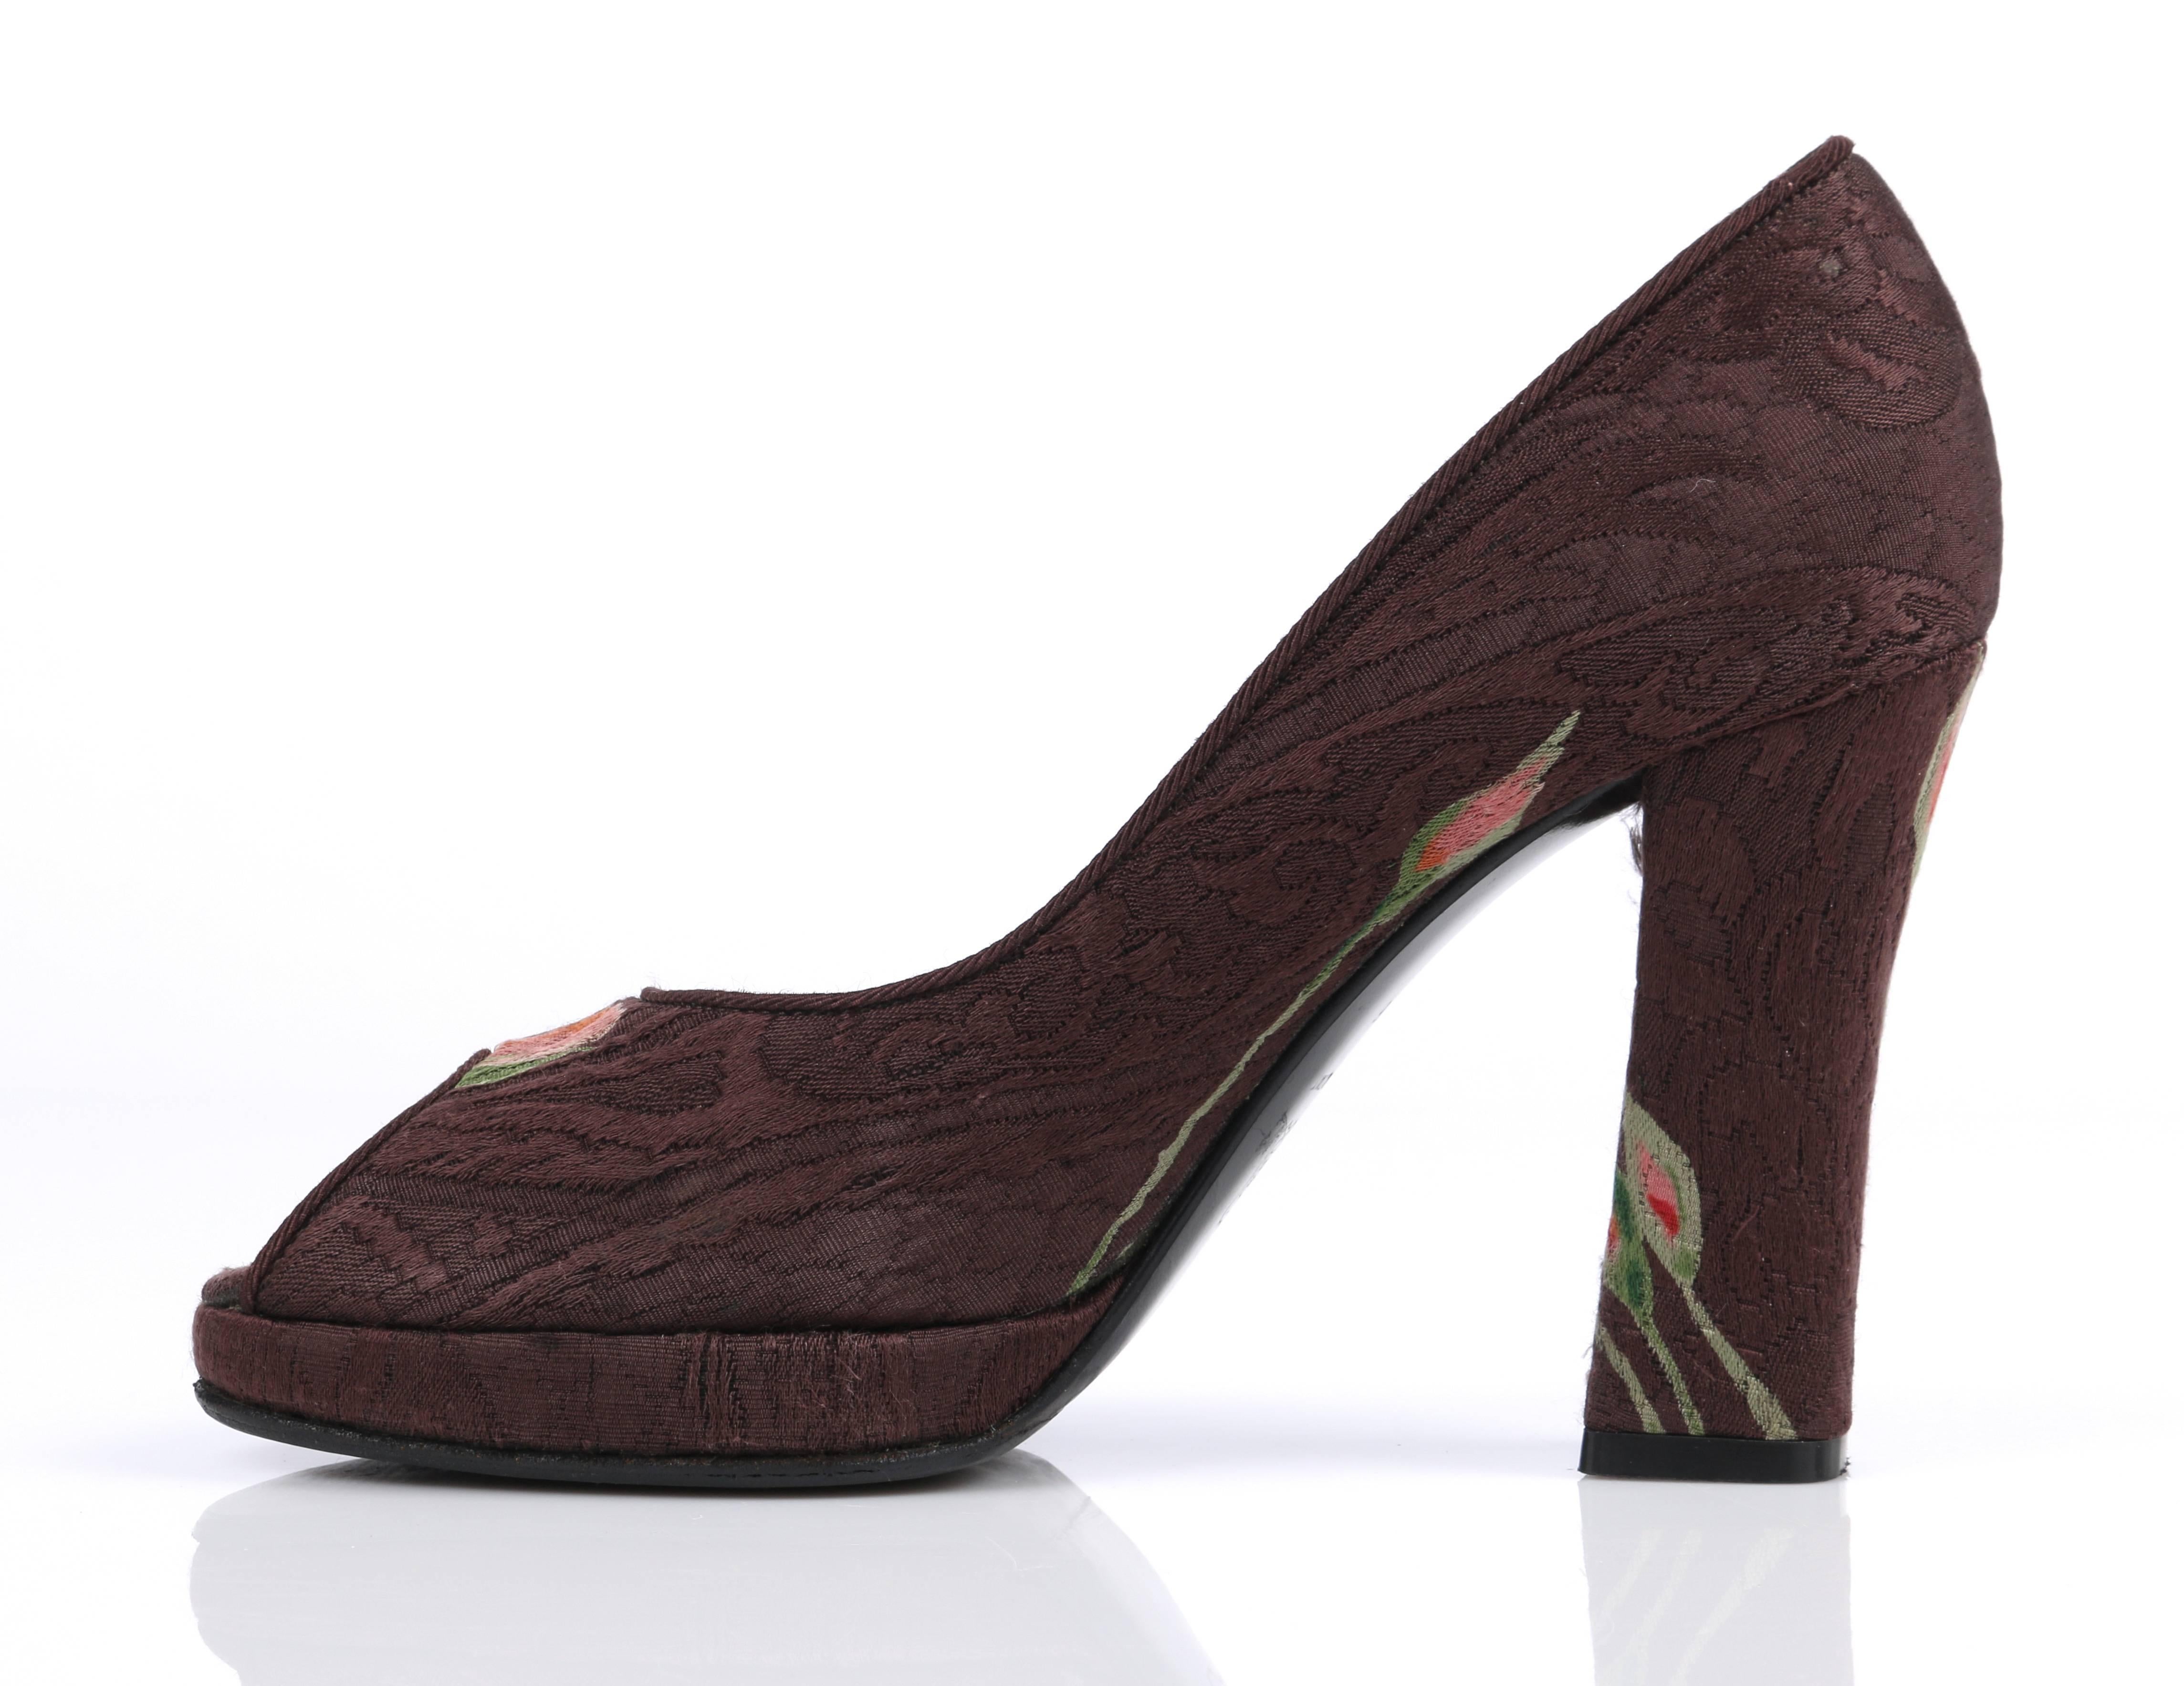 Dolce & Gabbana brown floral brocade peep toe platform pumps. Upper is a brown floral brocade. Peep toe. Low platform. High squared covered heel. Marked Material: Sole is marked 